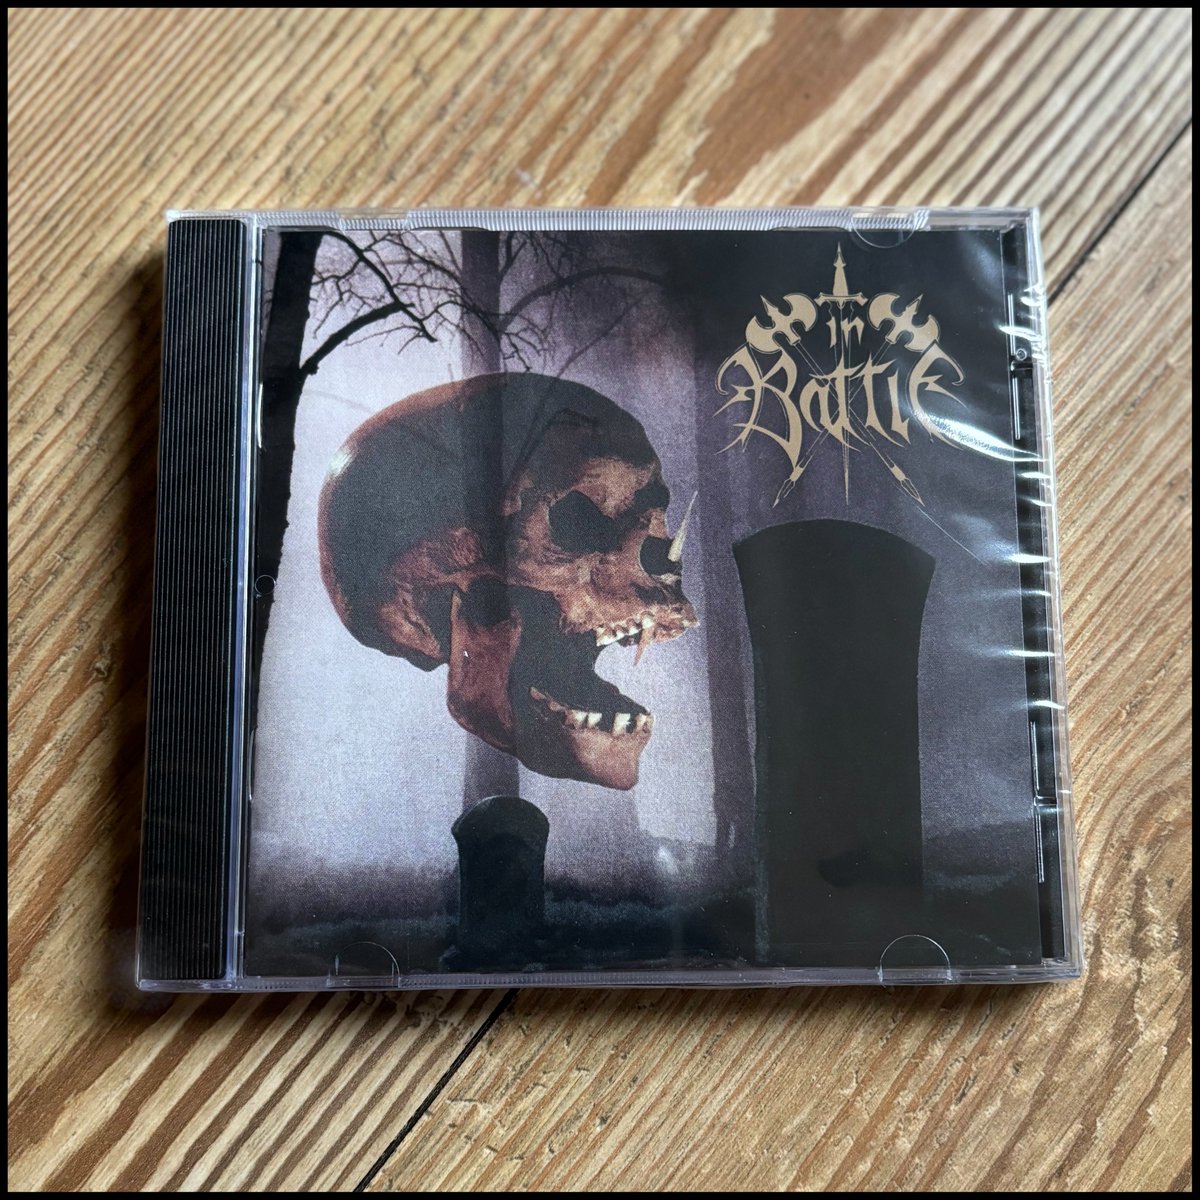 New black and death metal CDs, cassettes and vinyl now in stock at: cultneverdies.myshopify.com/collections/cd… #blackmetal #deathmetal #cultneverdies